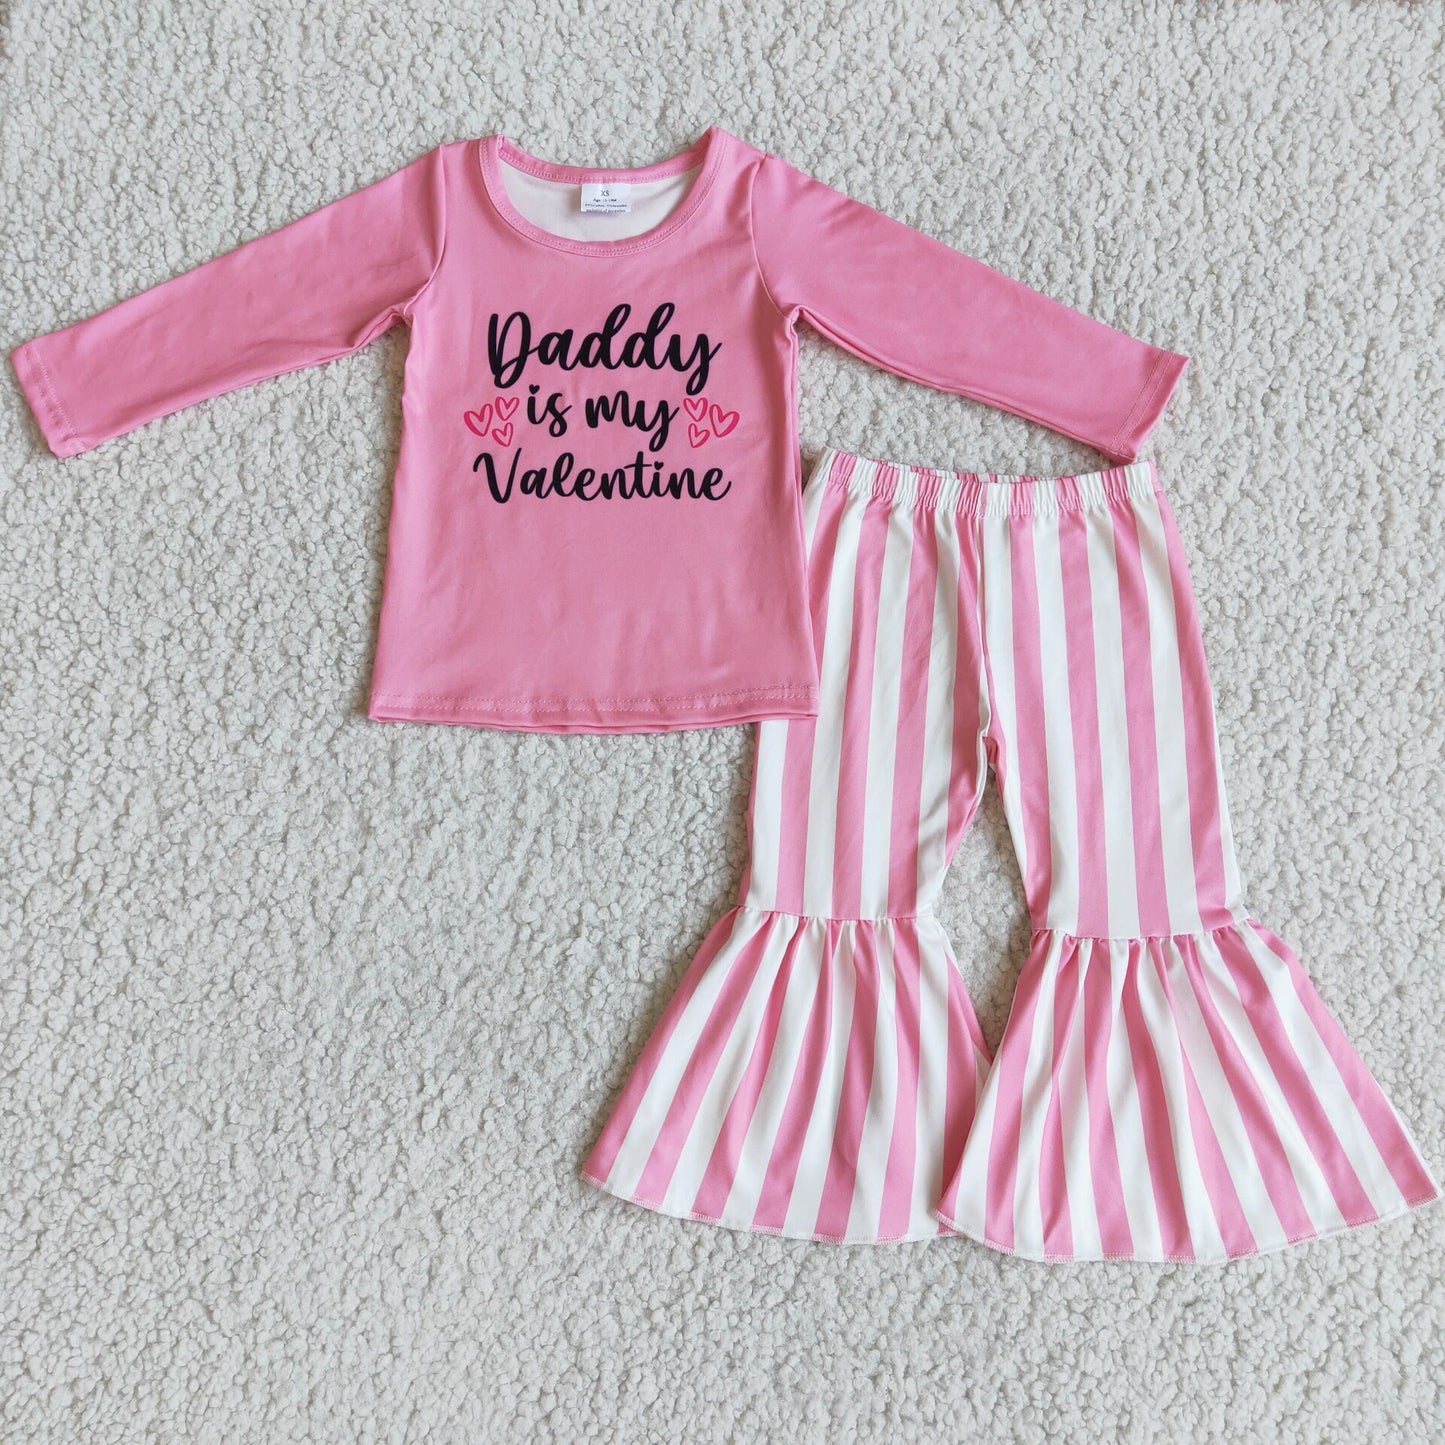 Daddy is my Valentine outfit